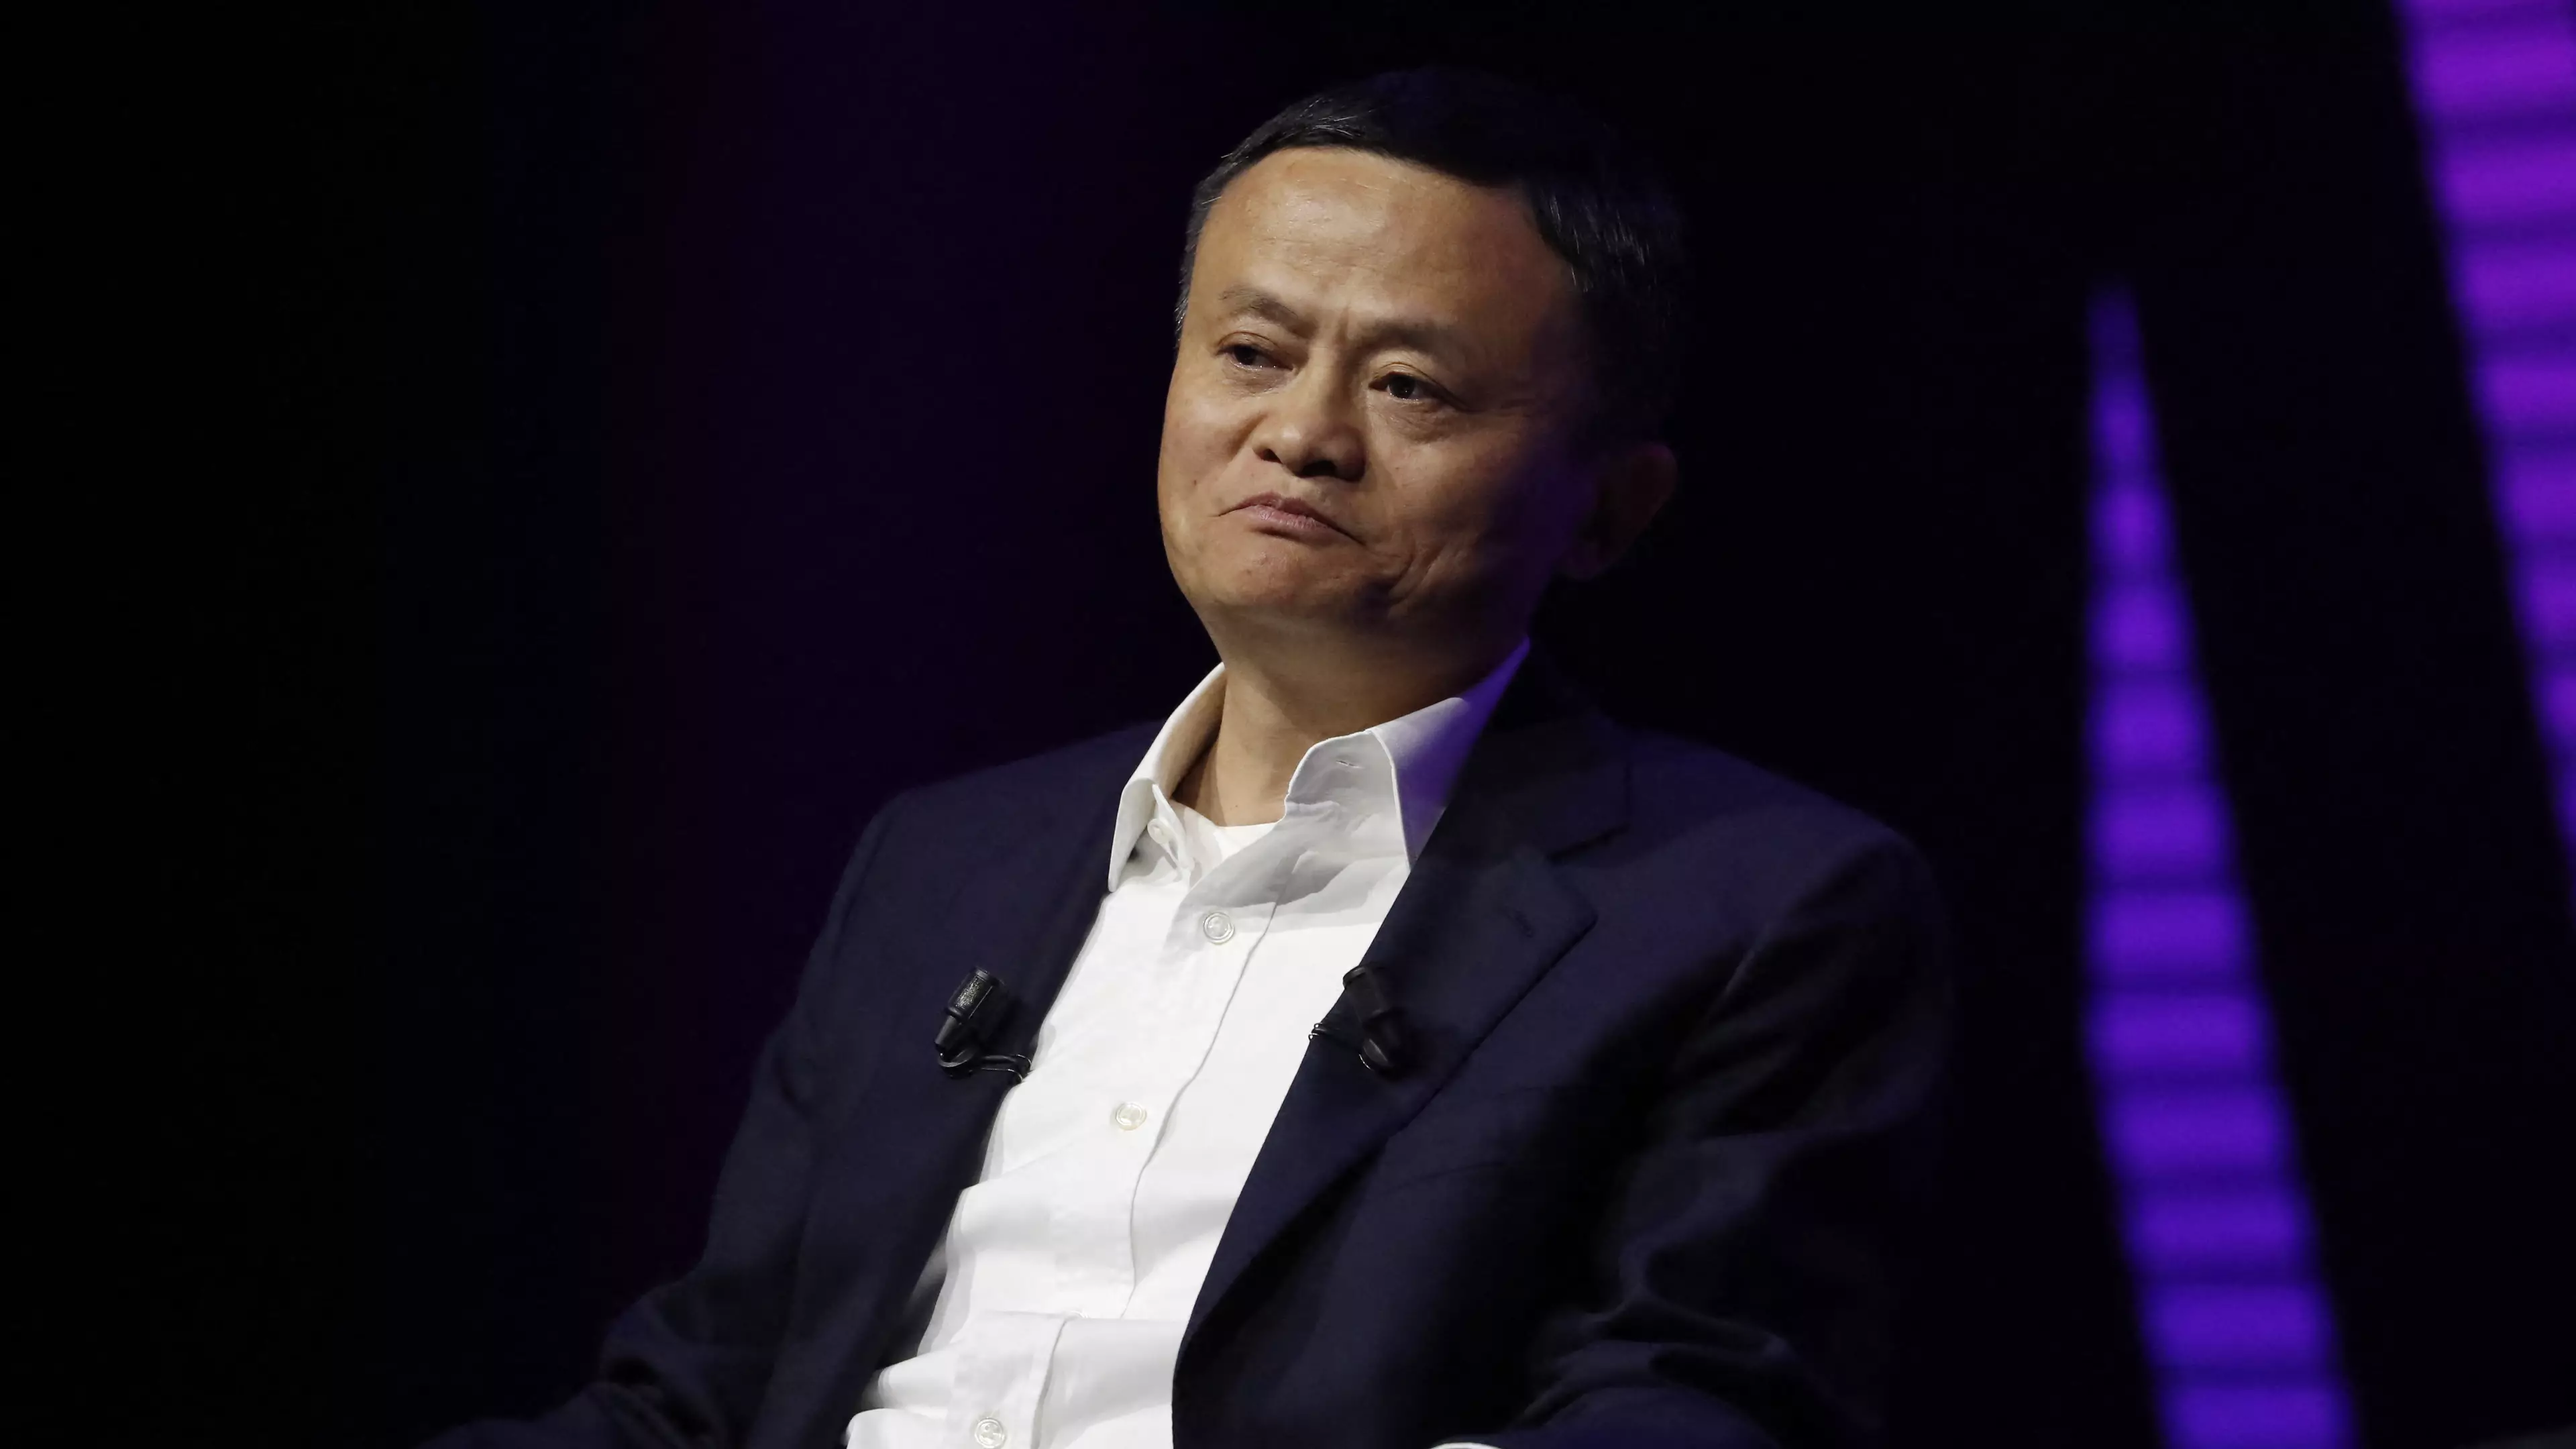 Billionaire Jack Ma Makes First Public Appearance Since Criticising Chinese Authorities In October